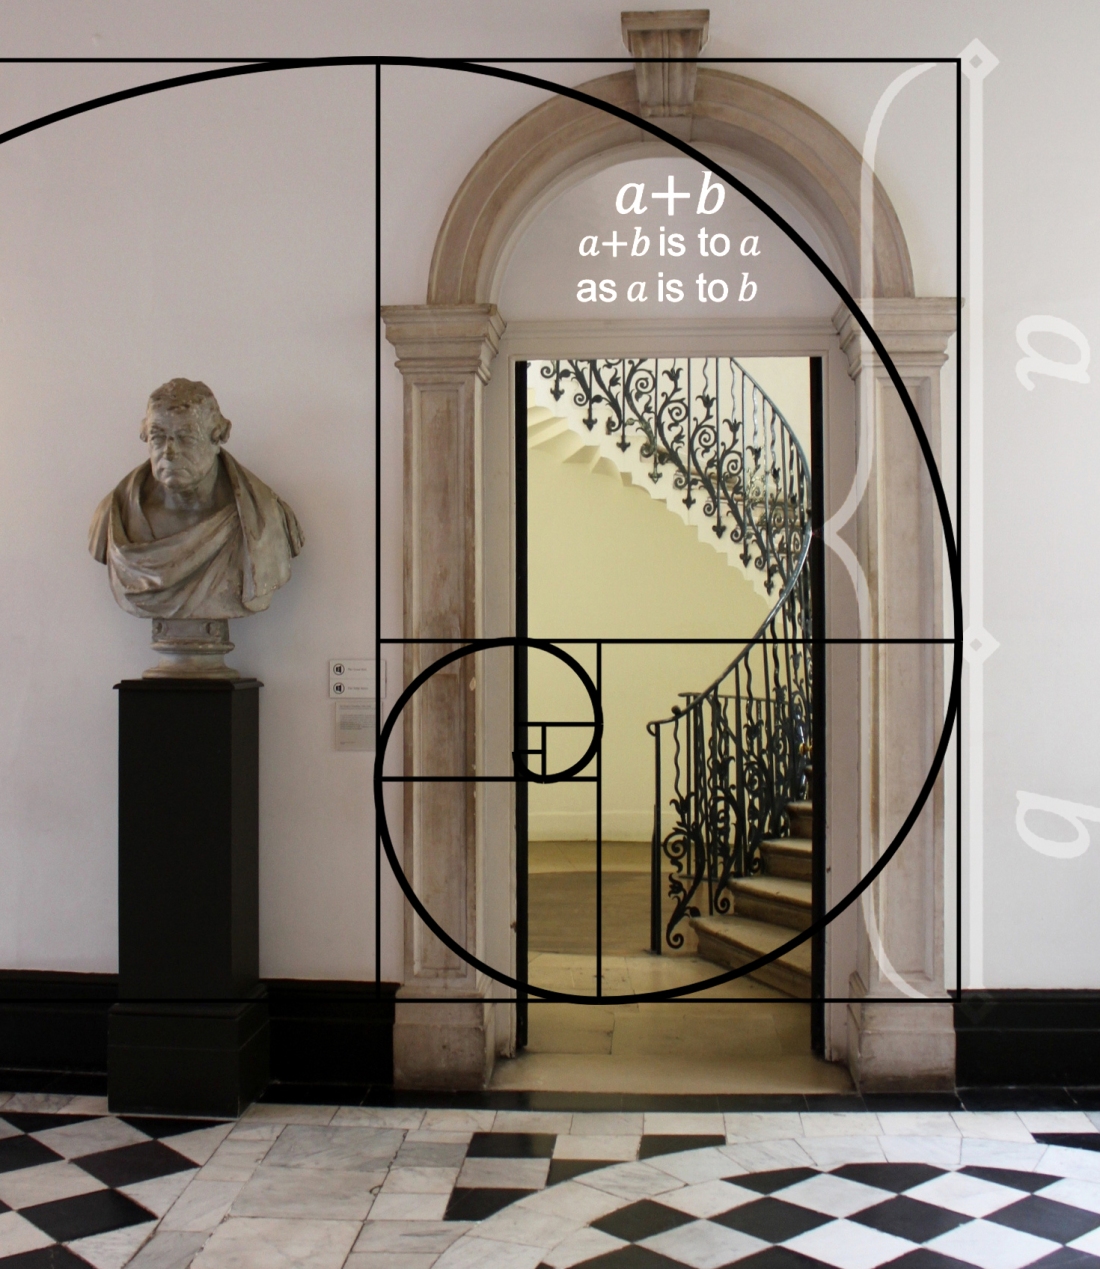 Limestone Entryway in a National Landmark. Height and width designed and carved using the golden ratio proportions.